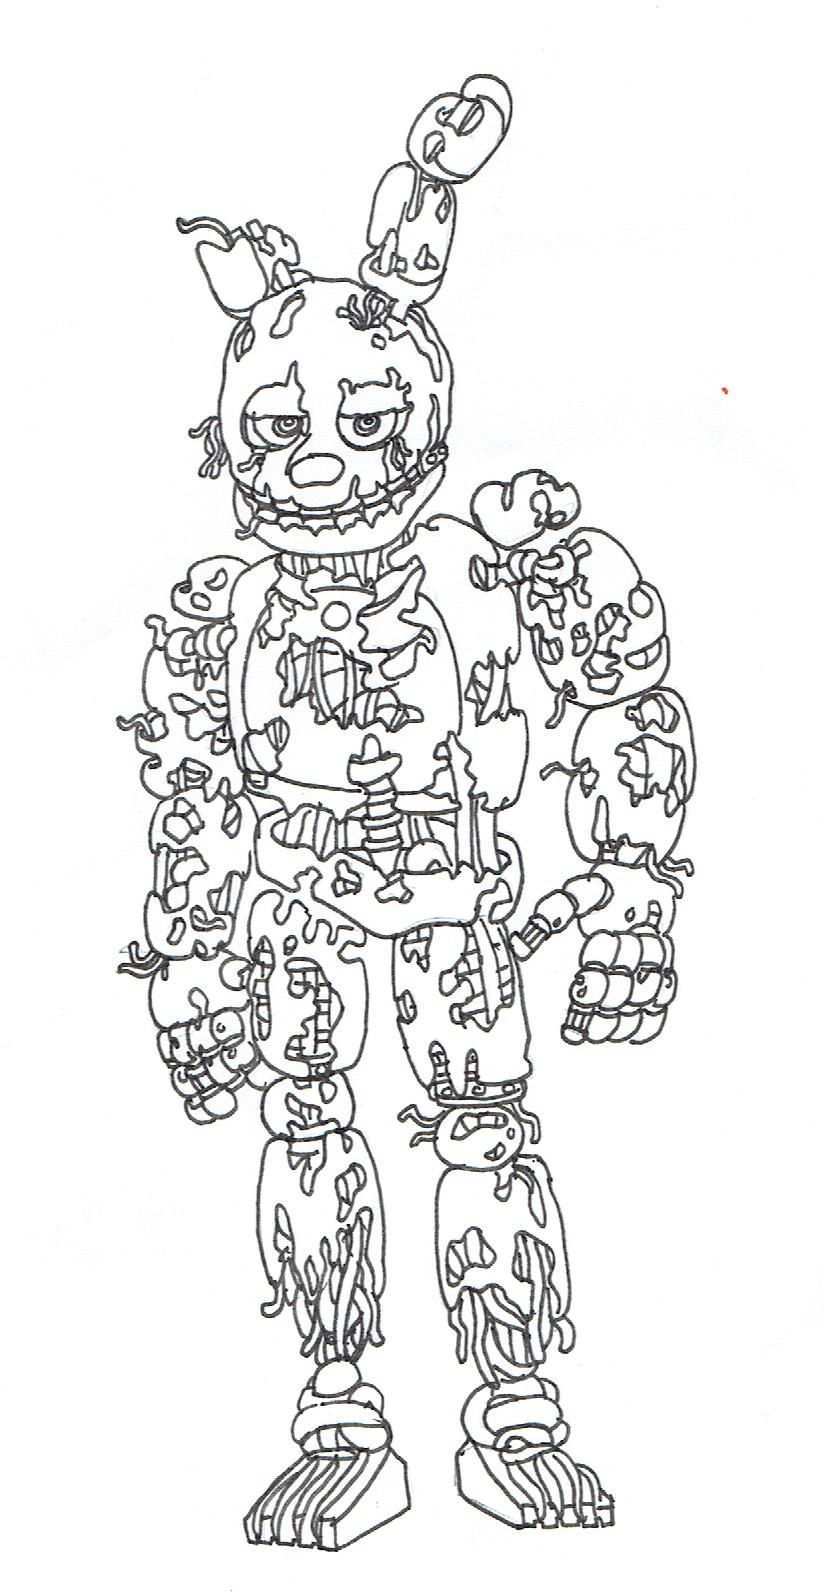 Five Nights At Freddys Coloring Pages Springtrap Free Coloring Sheets Fnaf Coloring P